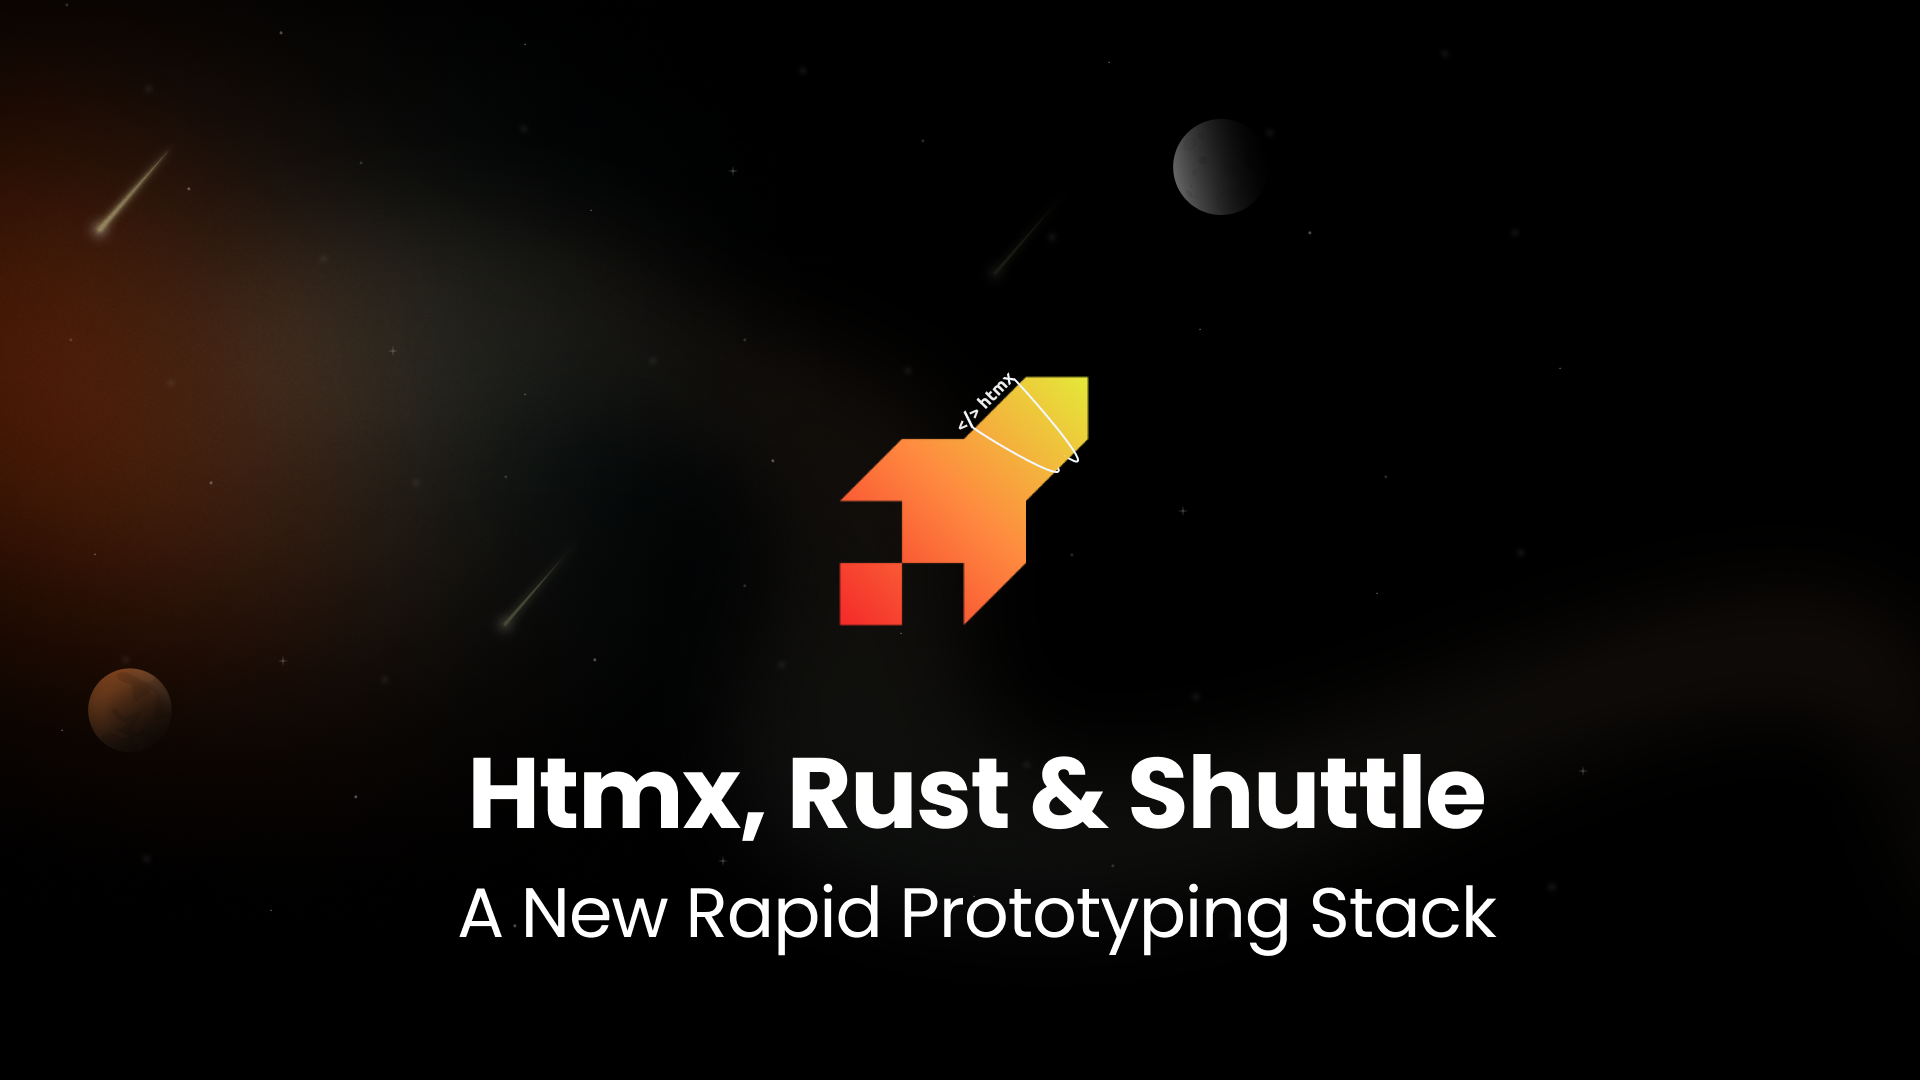 htmx, Rust & Shuttle: A New Rapid Prototyping Stack